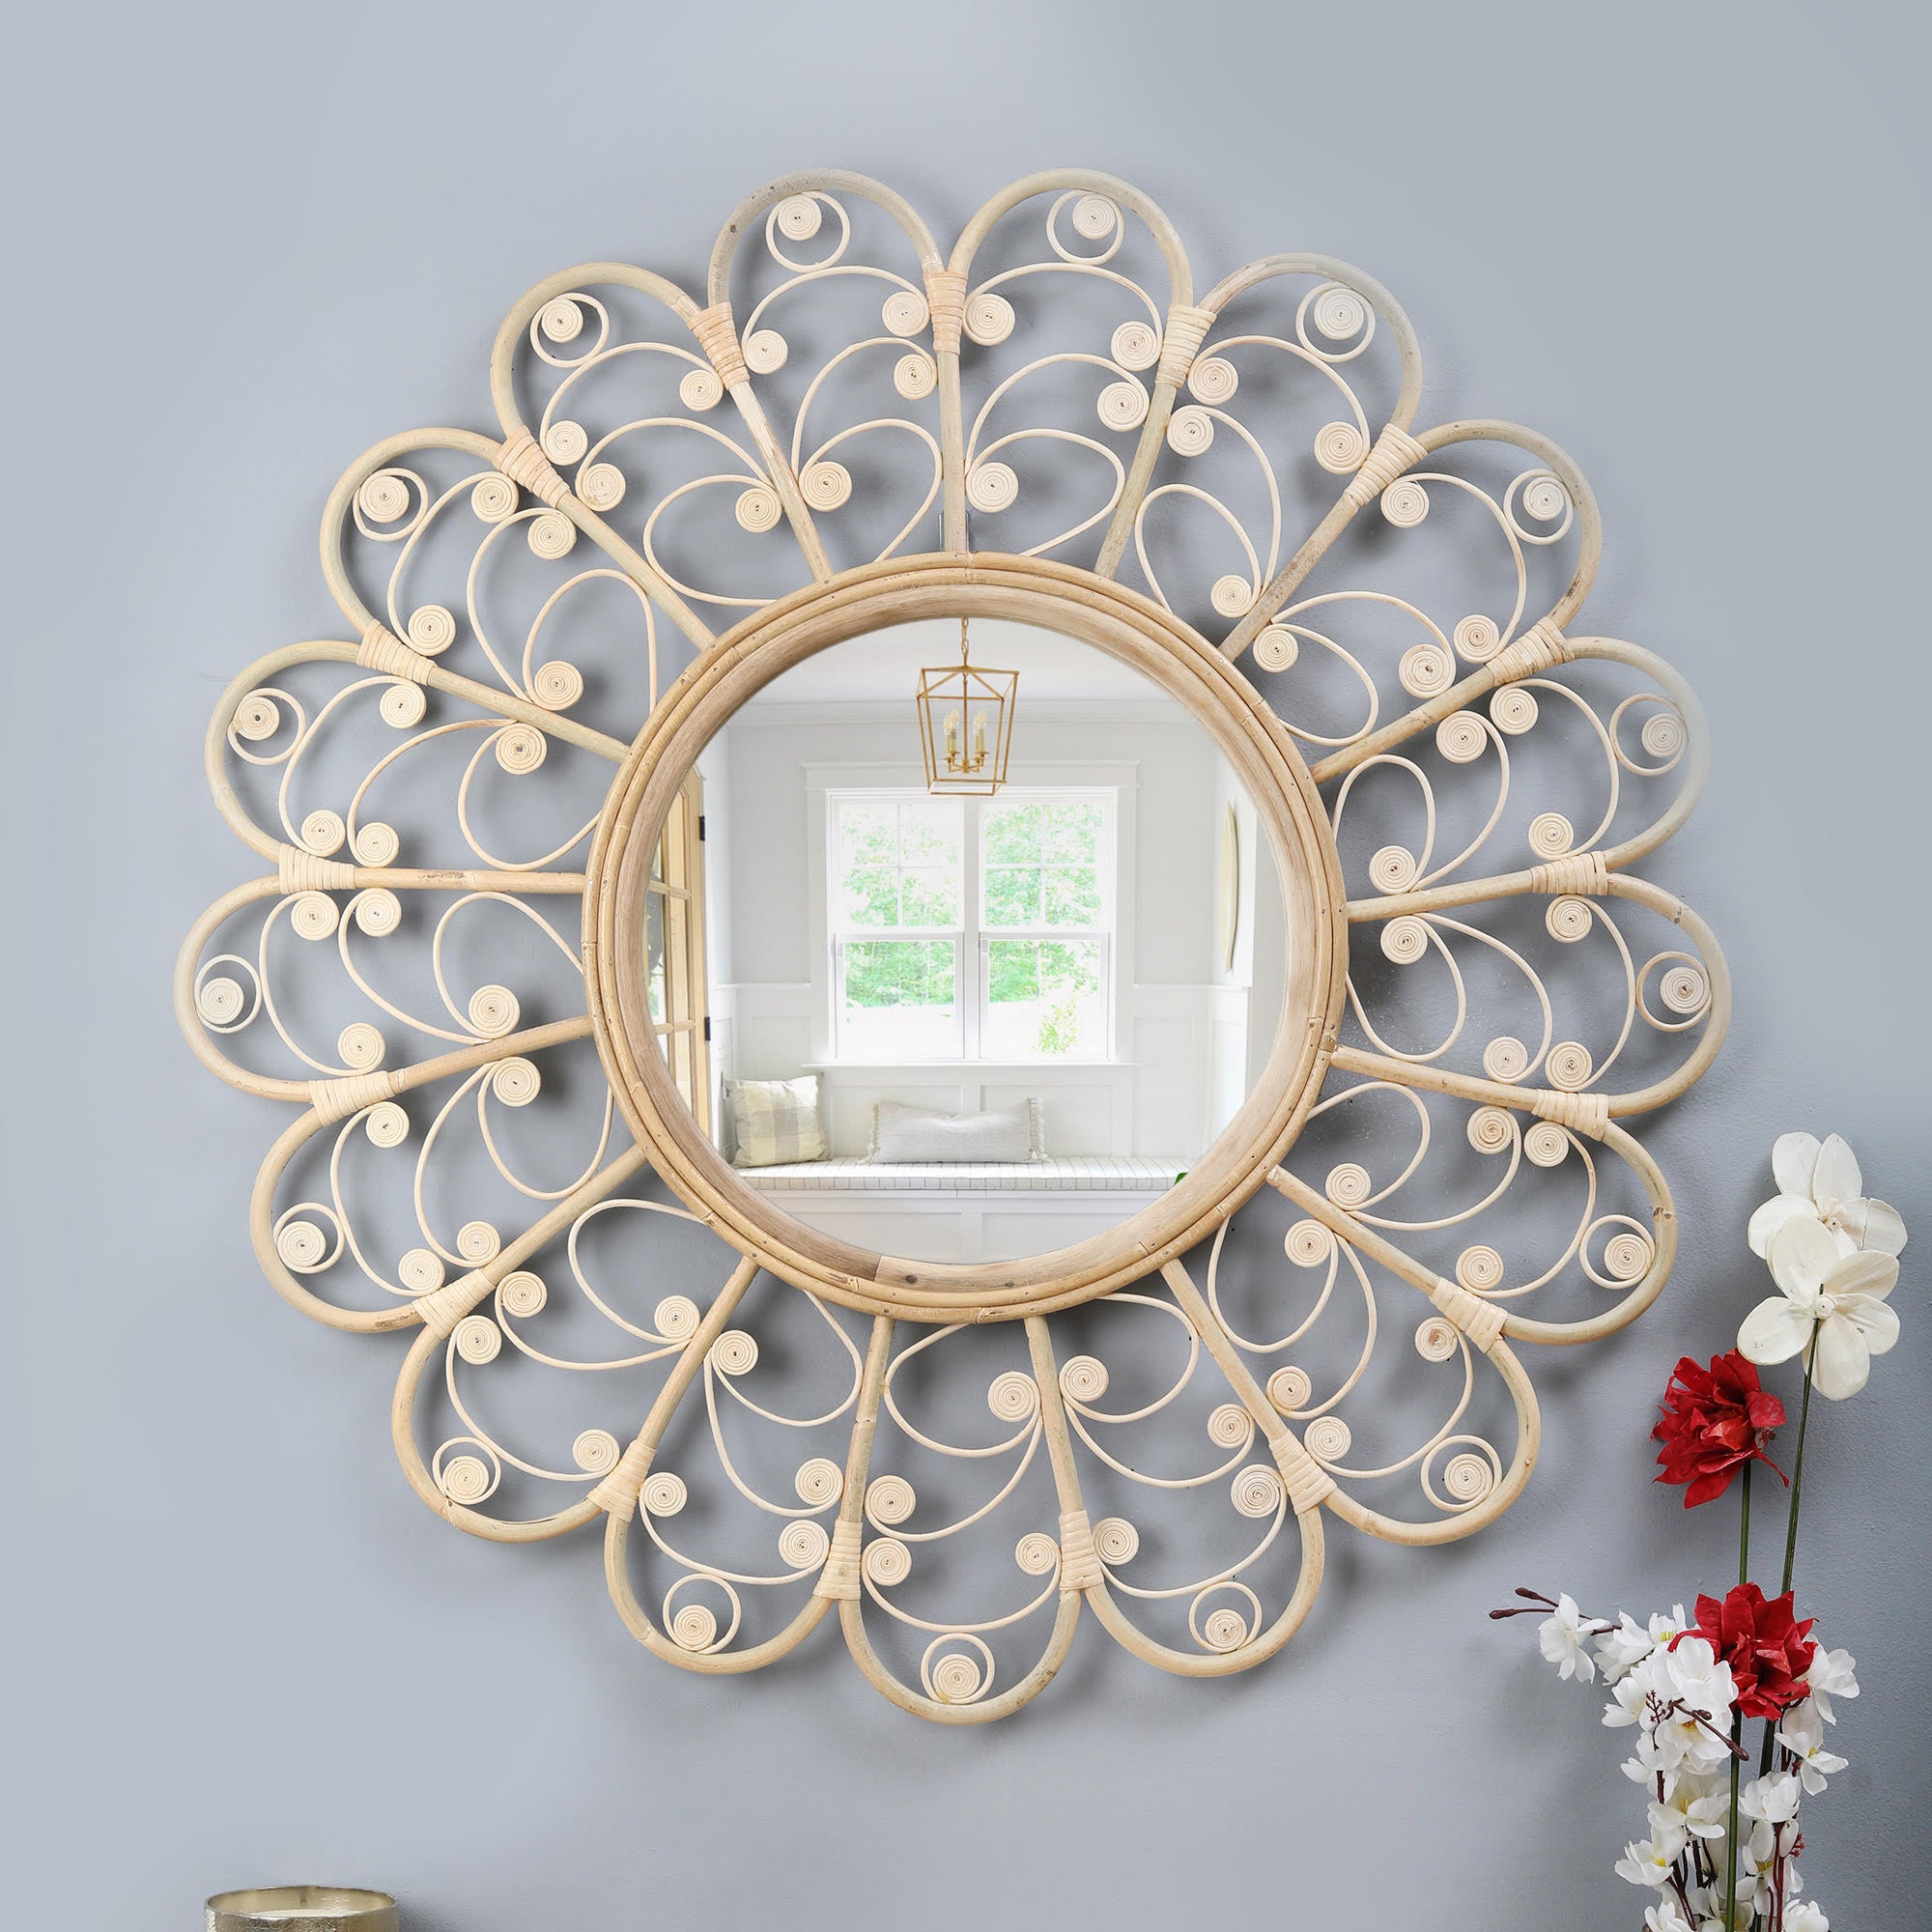 Twirly Reflections - Handcrafted Cane Wall Mirror